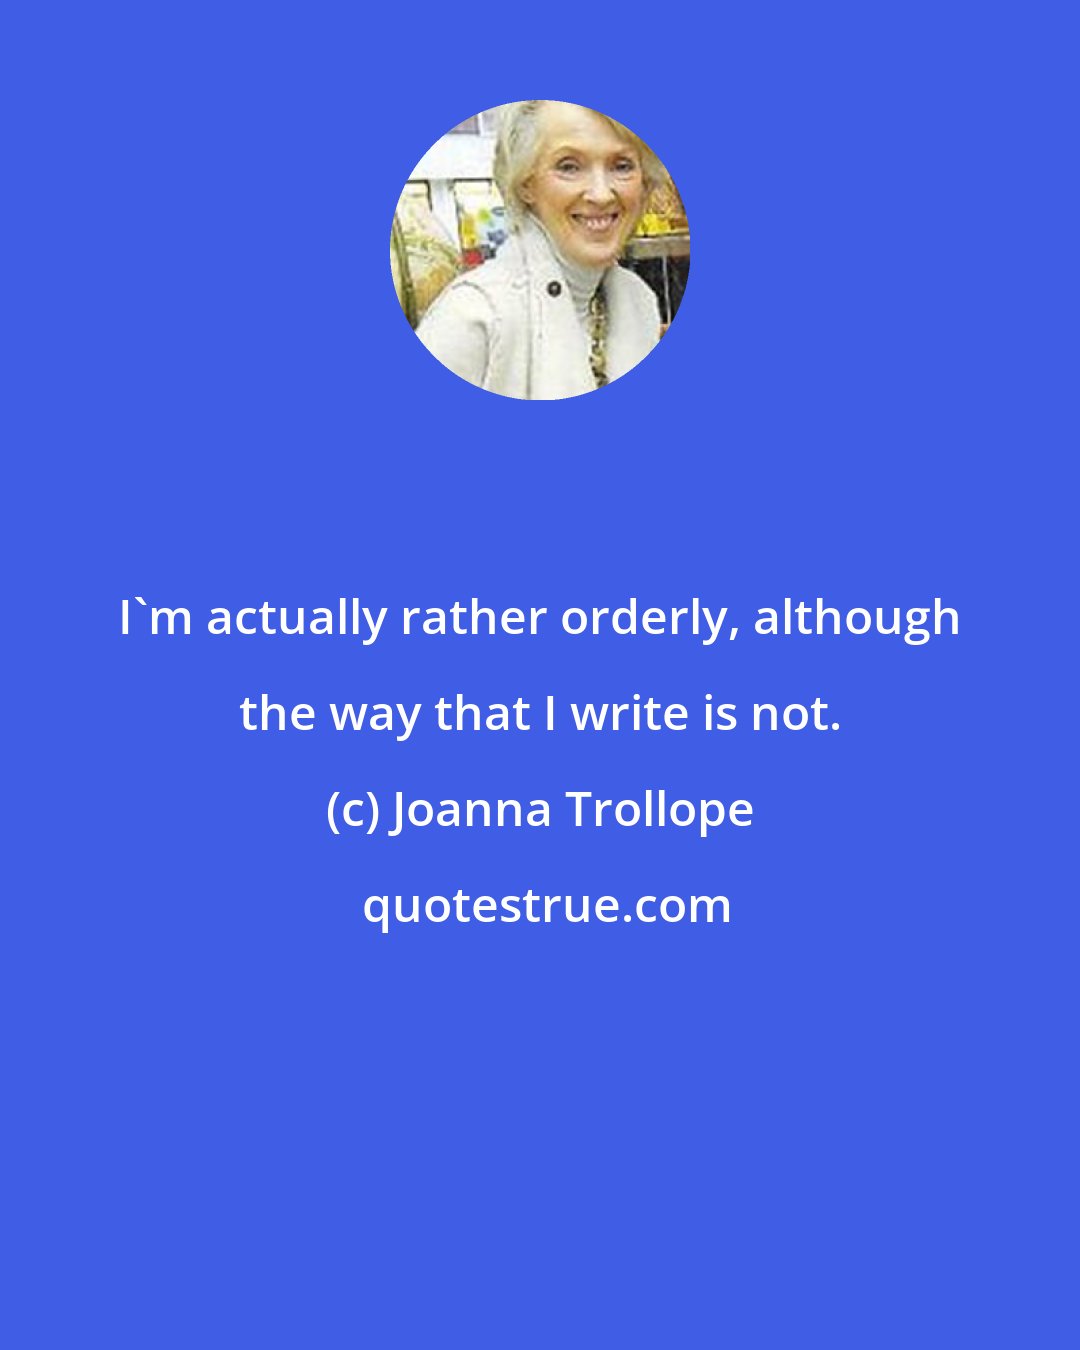 Joanna Trollope: I'm actually rather orderly, although the way that I write is not.